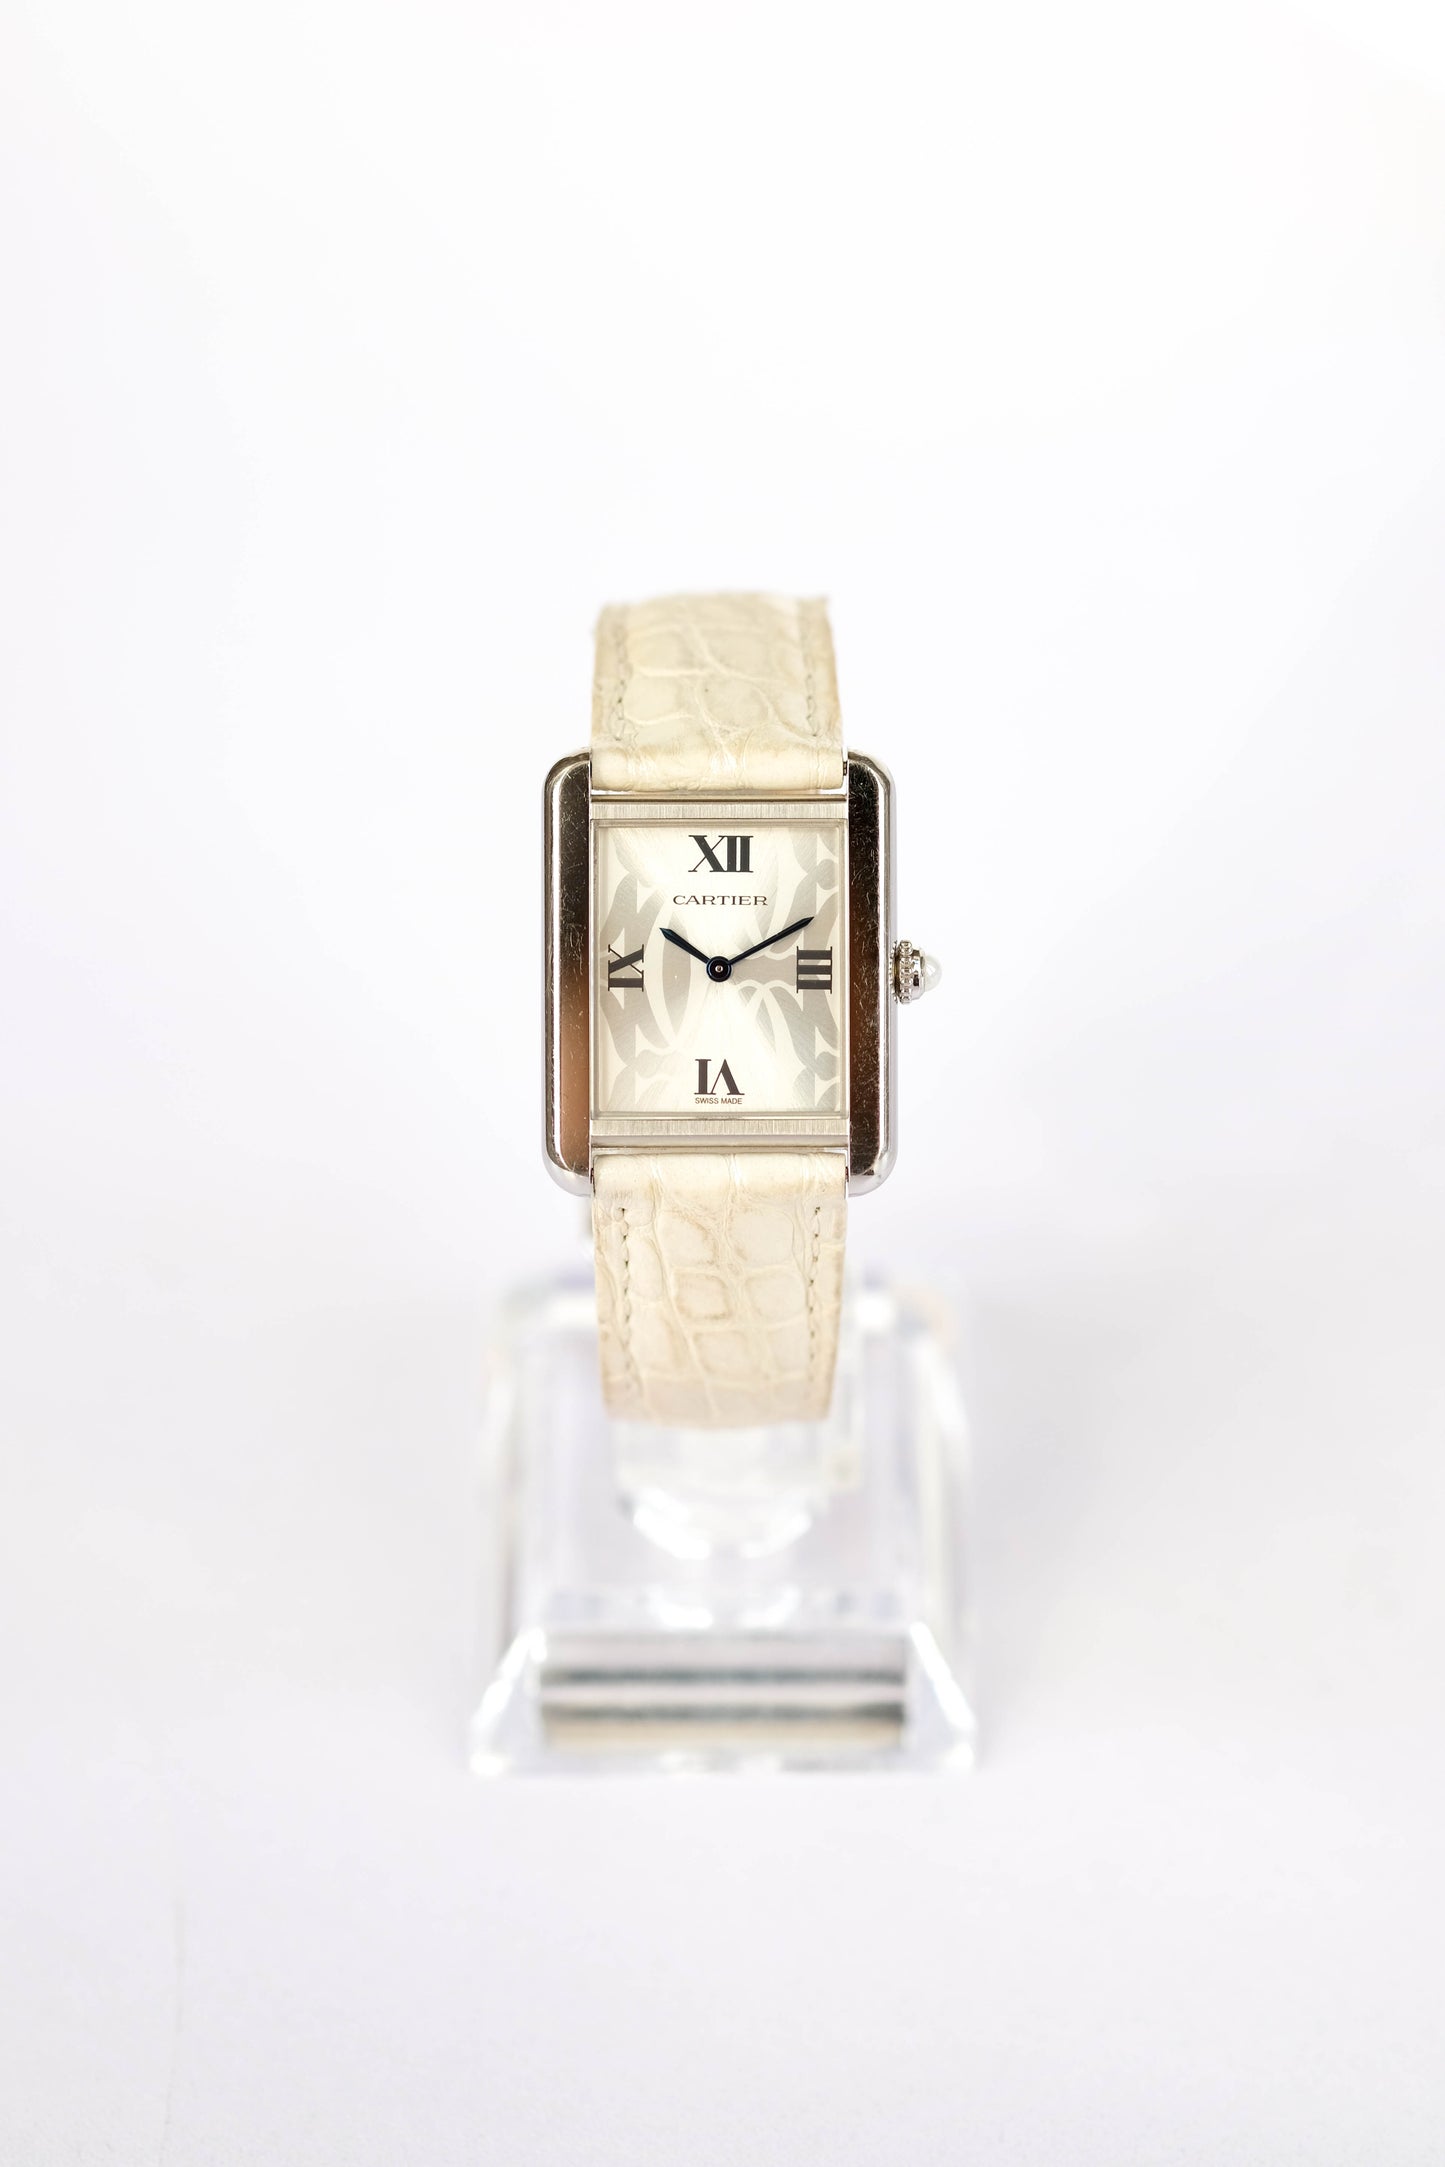 Cartier Tank Solo "signed" - full set